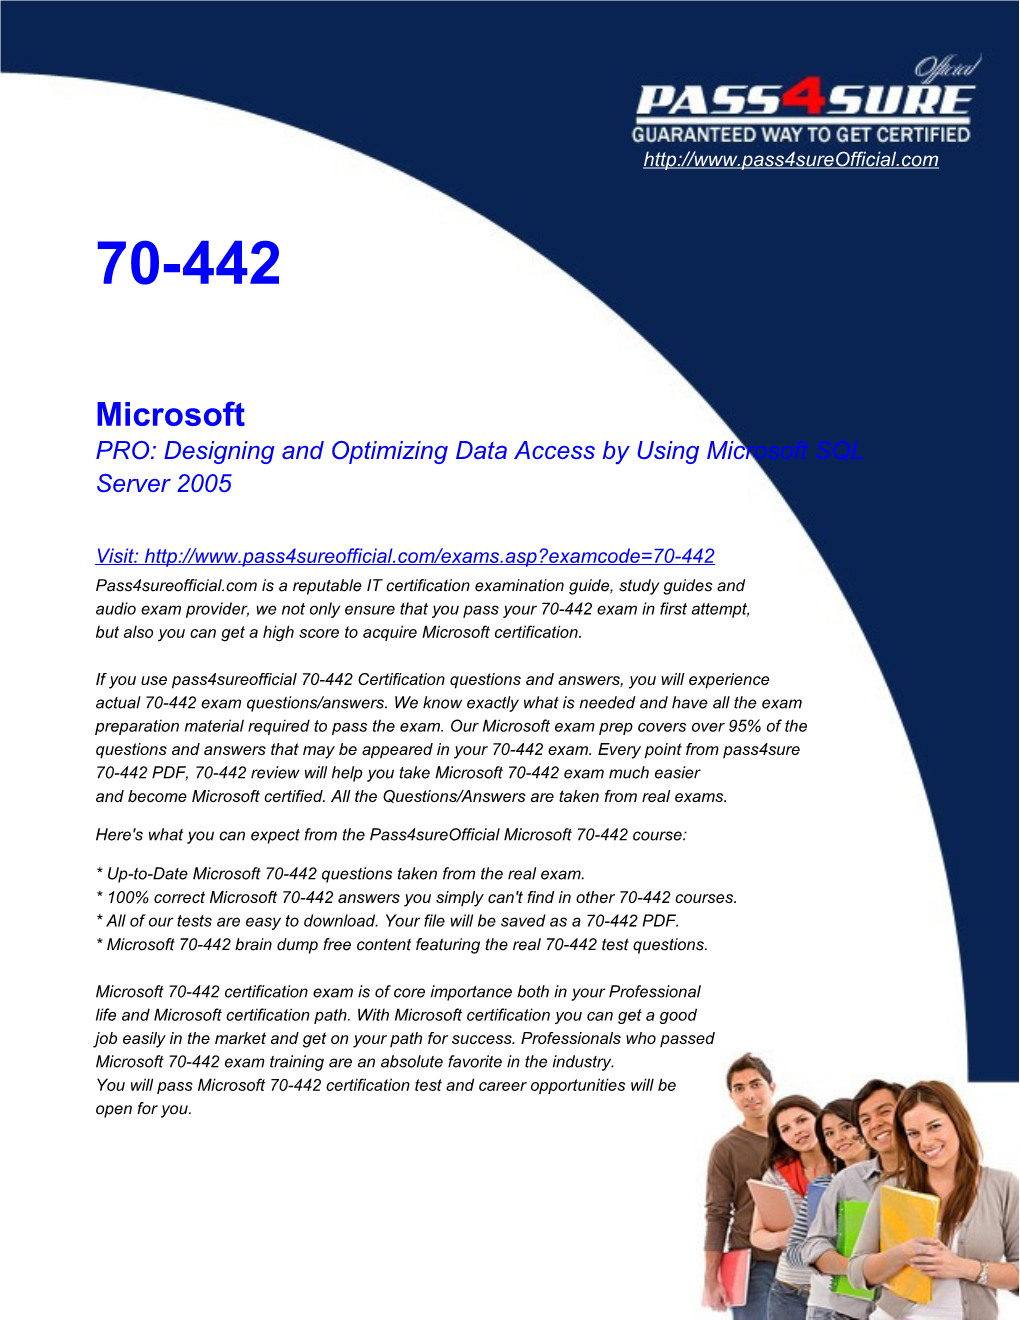 PRO: Designing and Optimizing Data Access by Using Microsoft SQL Server 2005